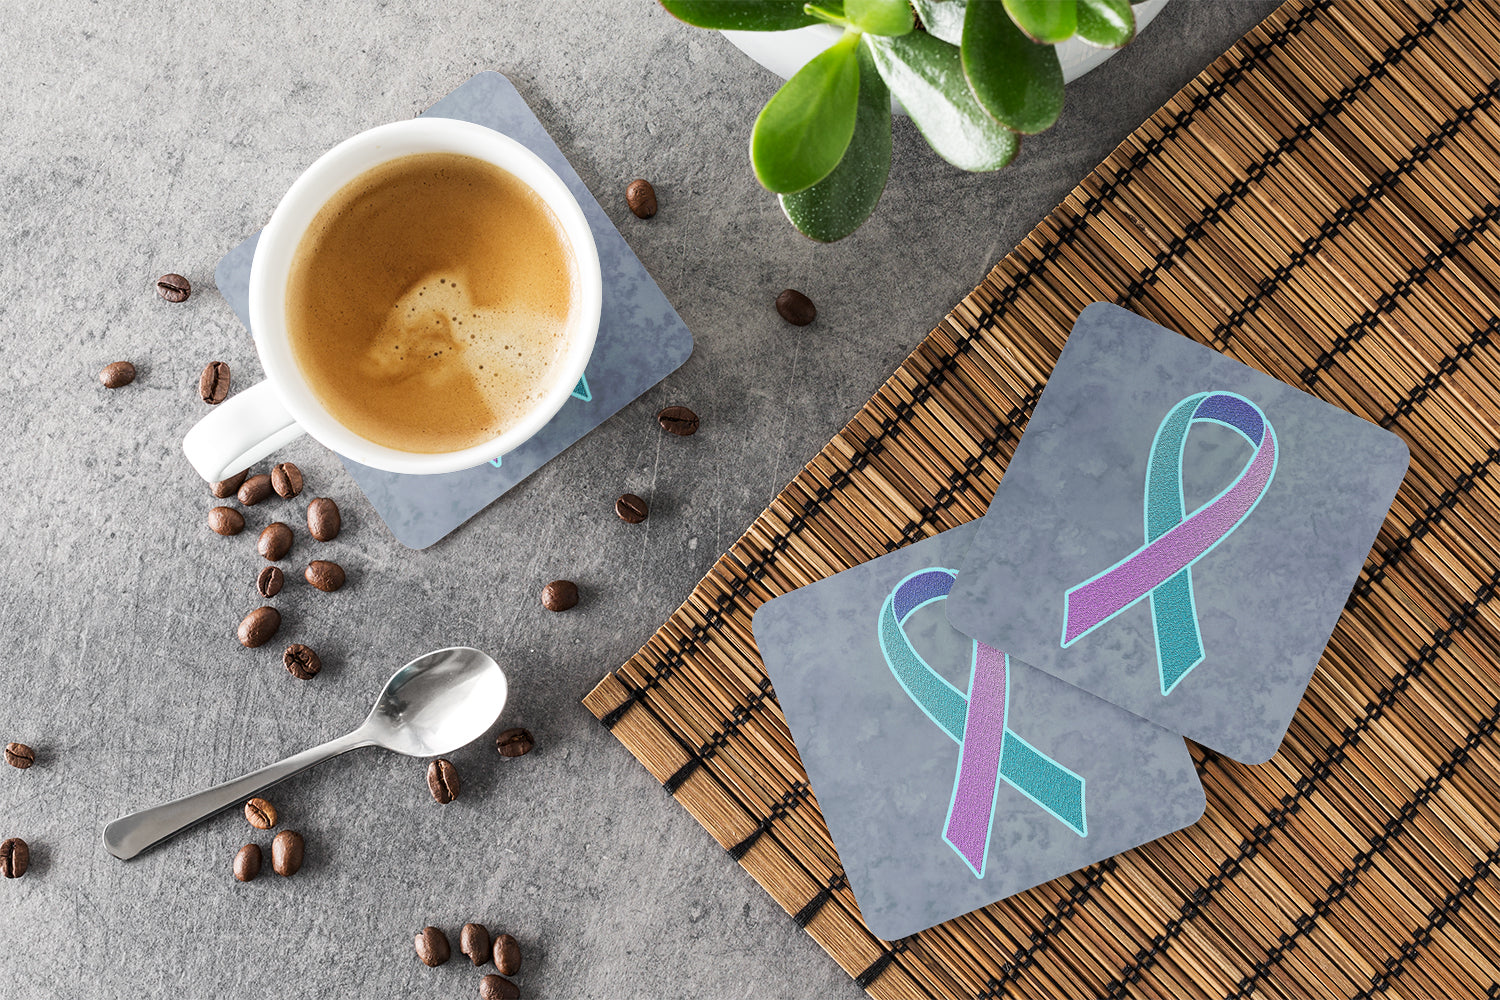 Set of 4 Teal, Pink and Blue Ribbon for Thyroid Cancer Awareness Foam Coasters AN1217FC - the-store.com